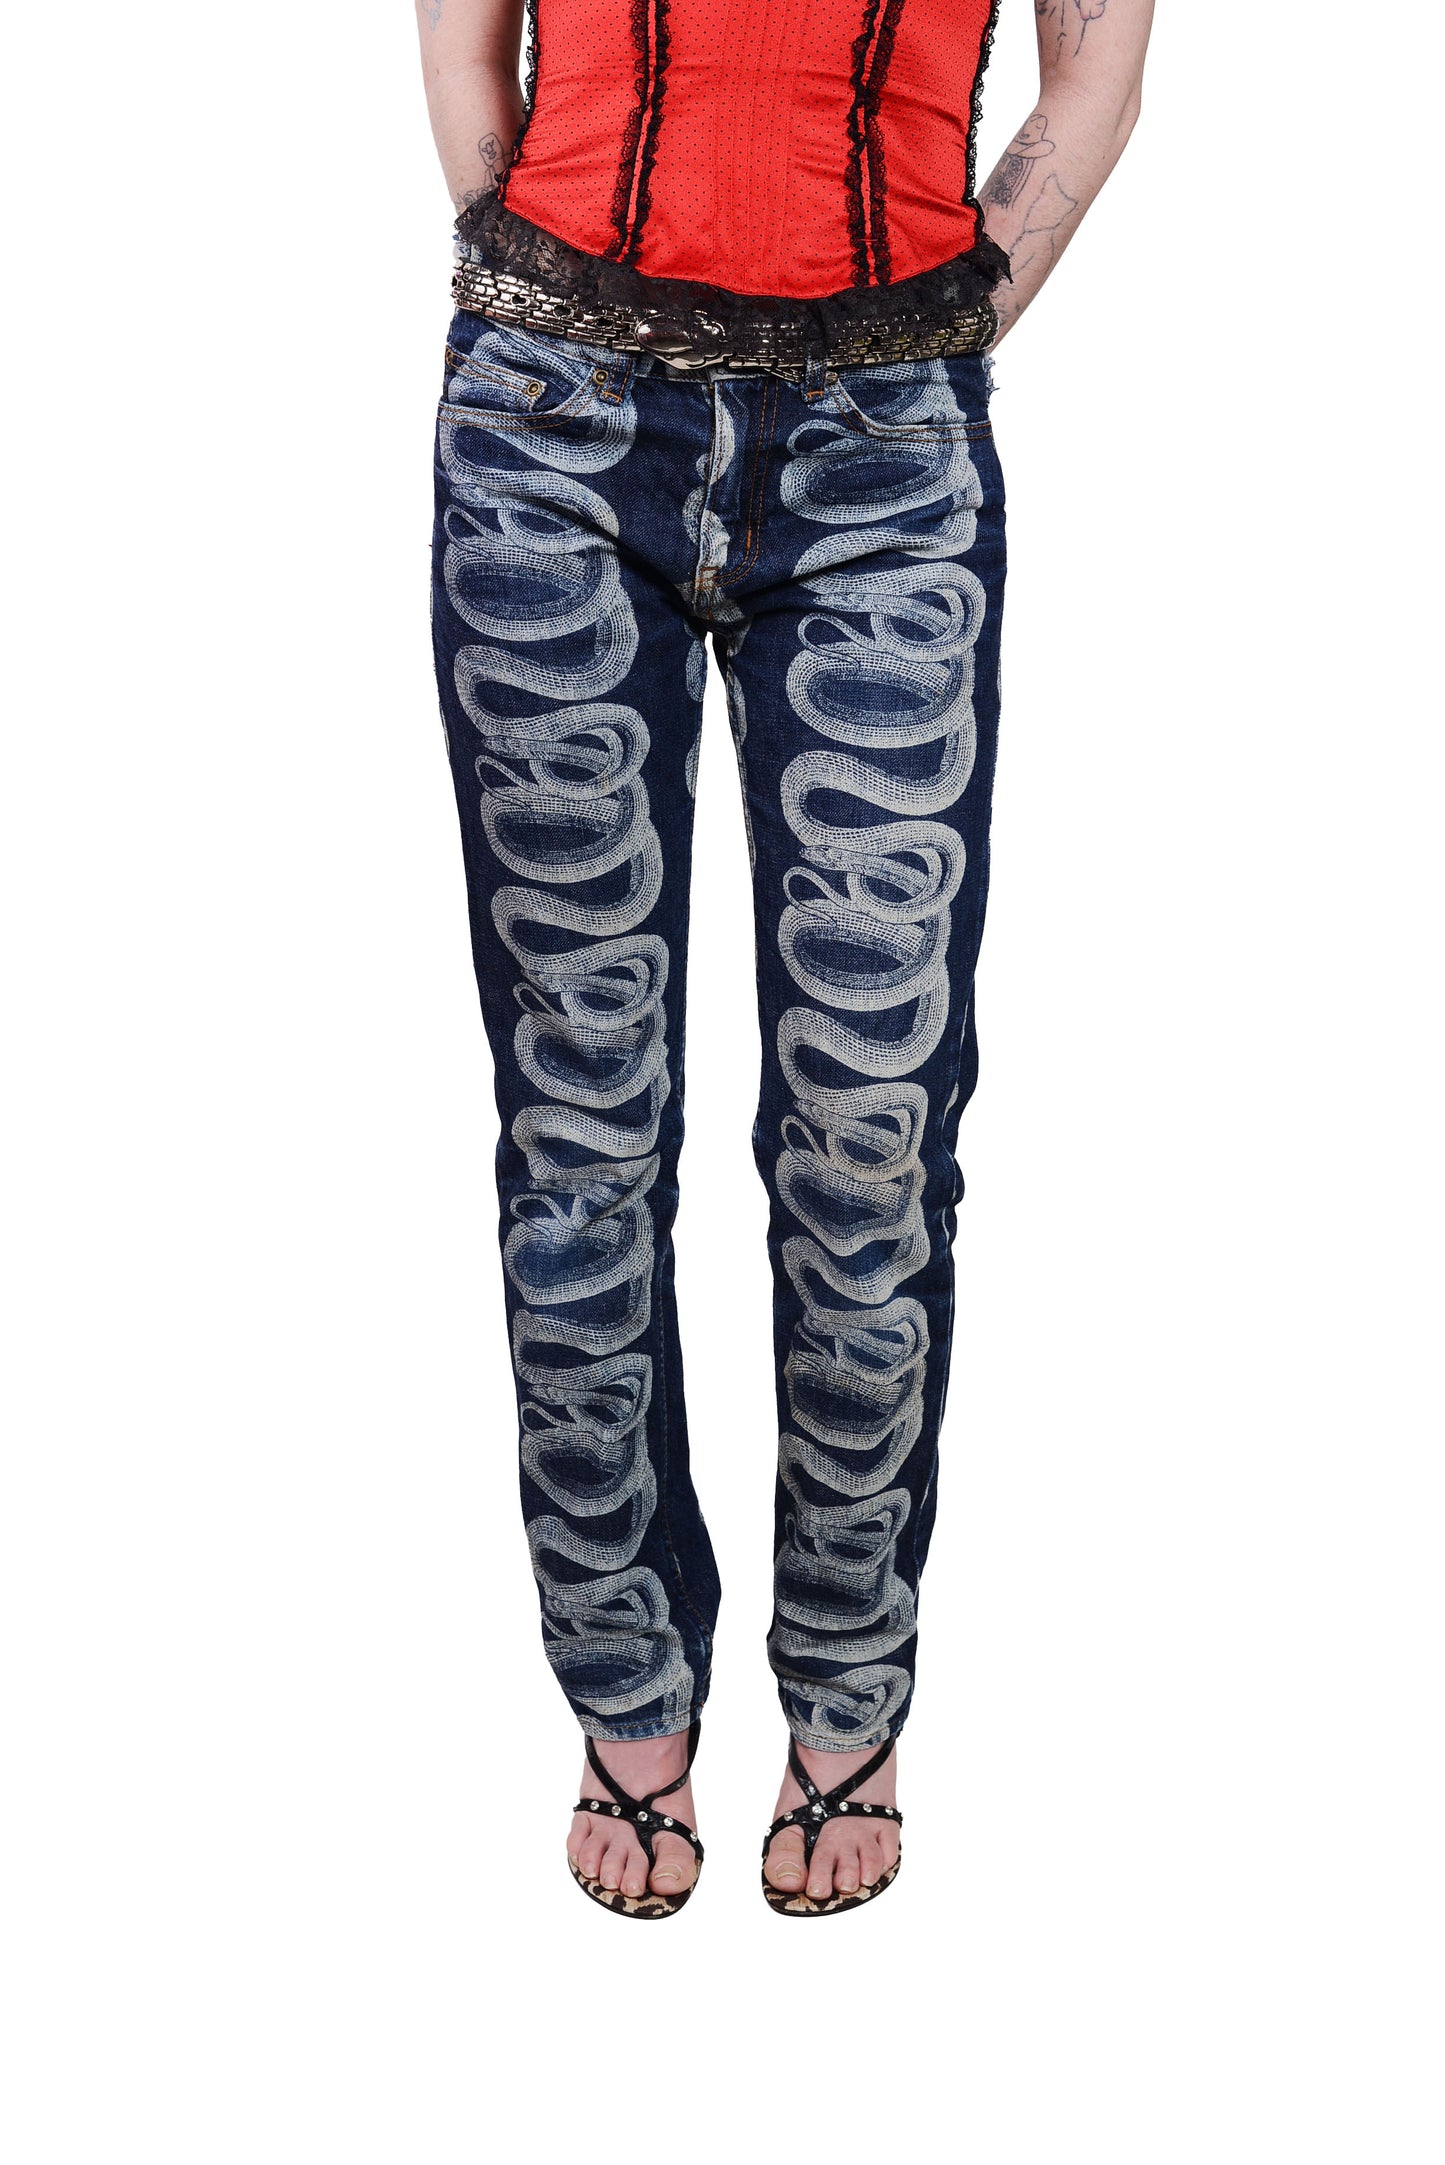 HYSTERIC GLAMOUR iconic snake pants